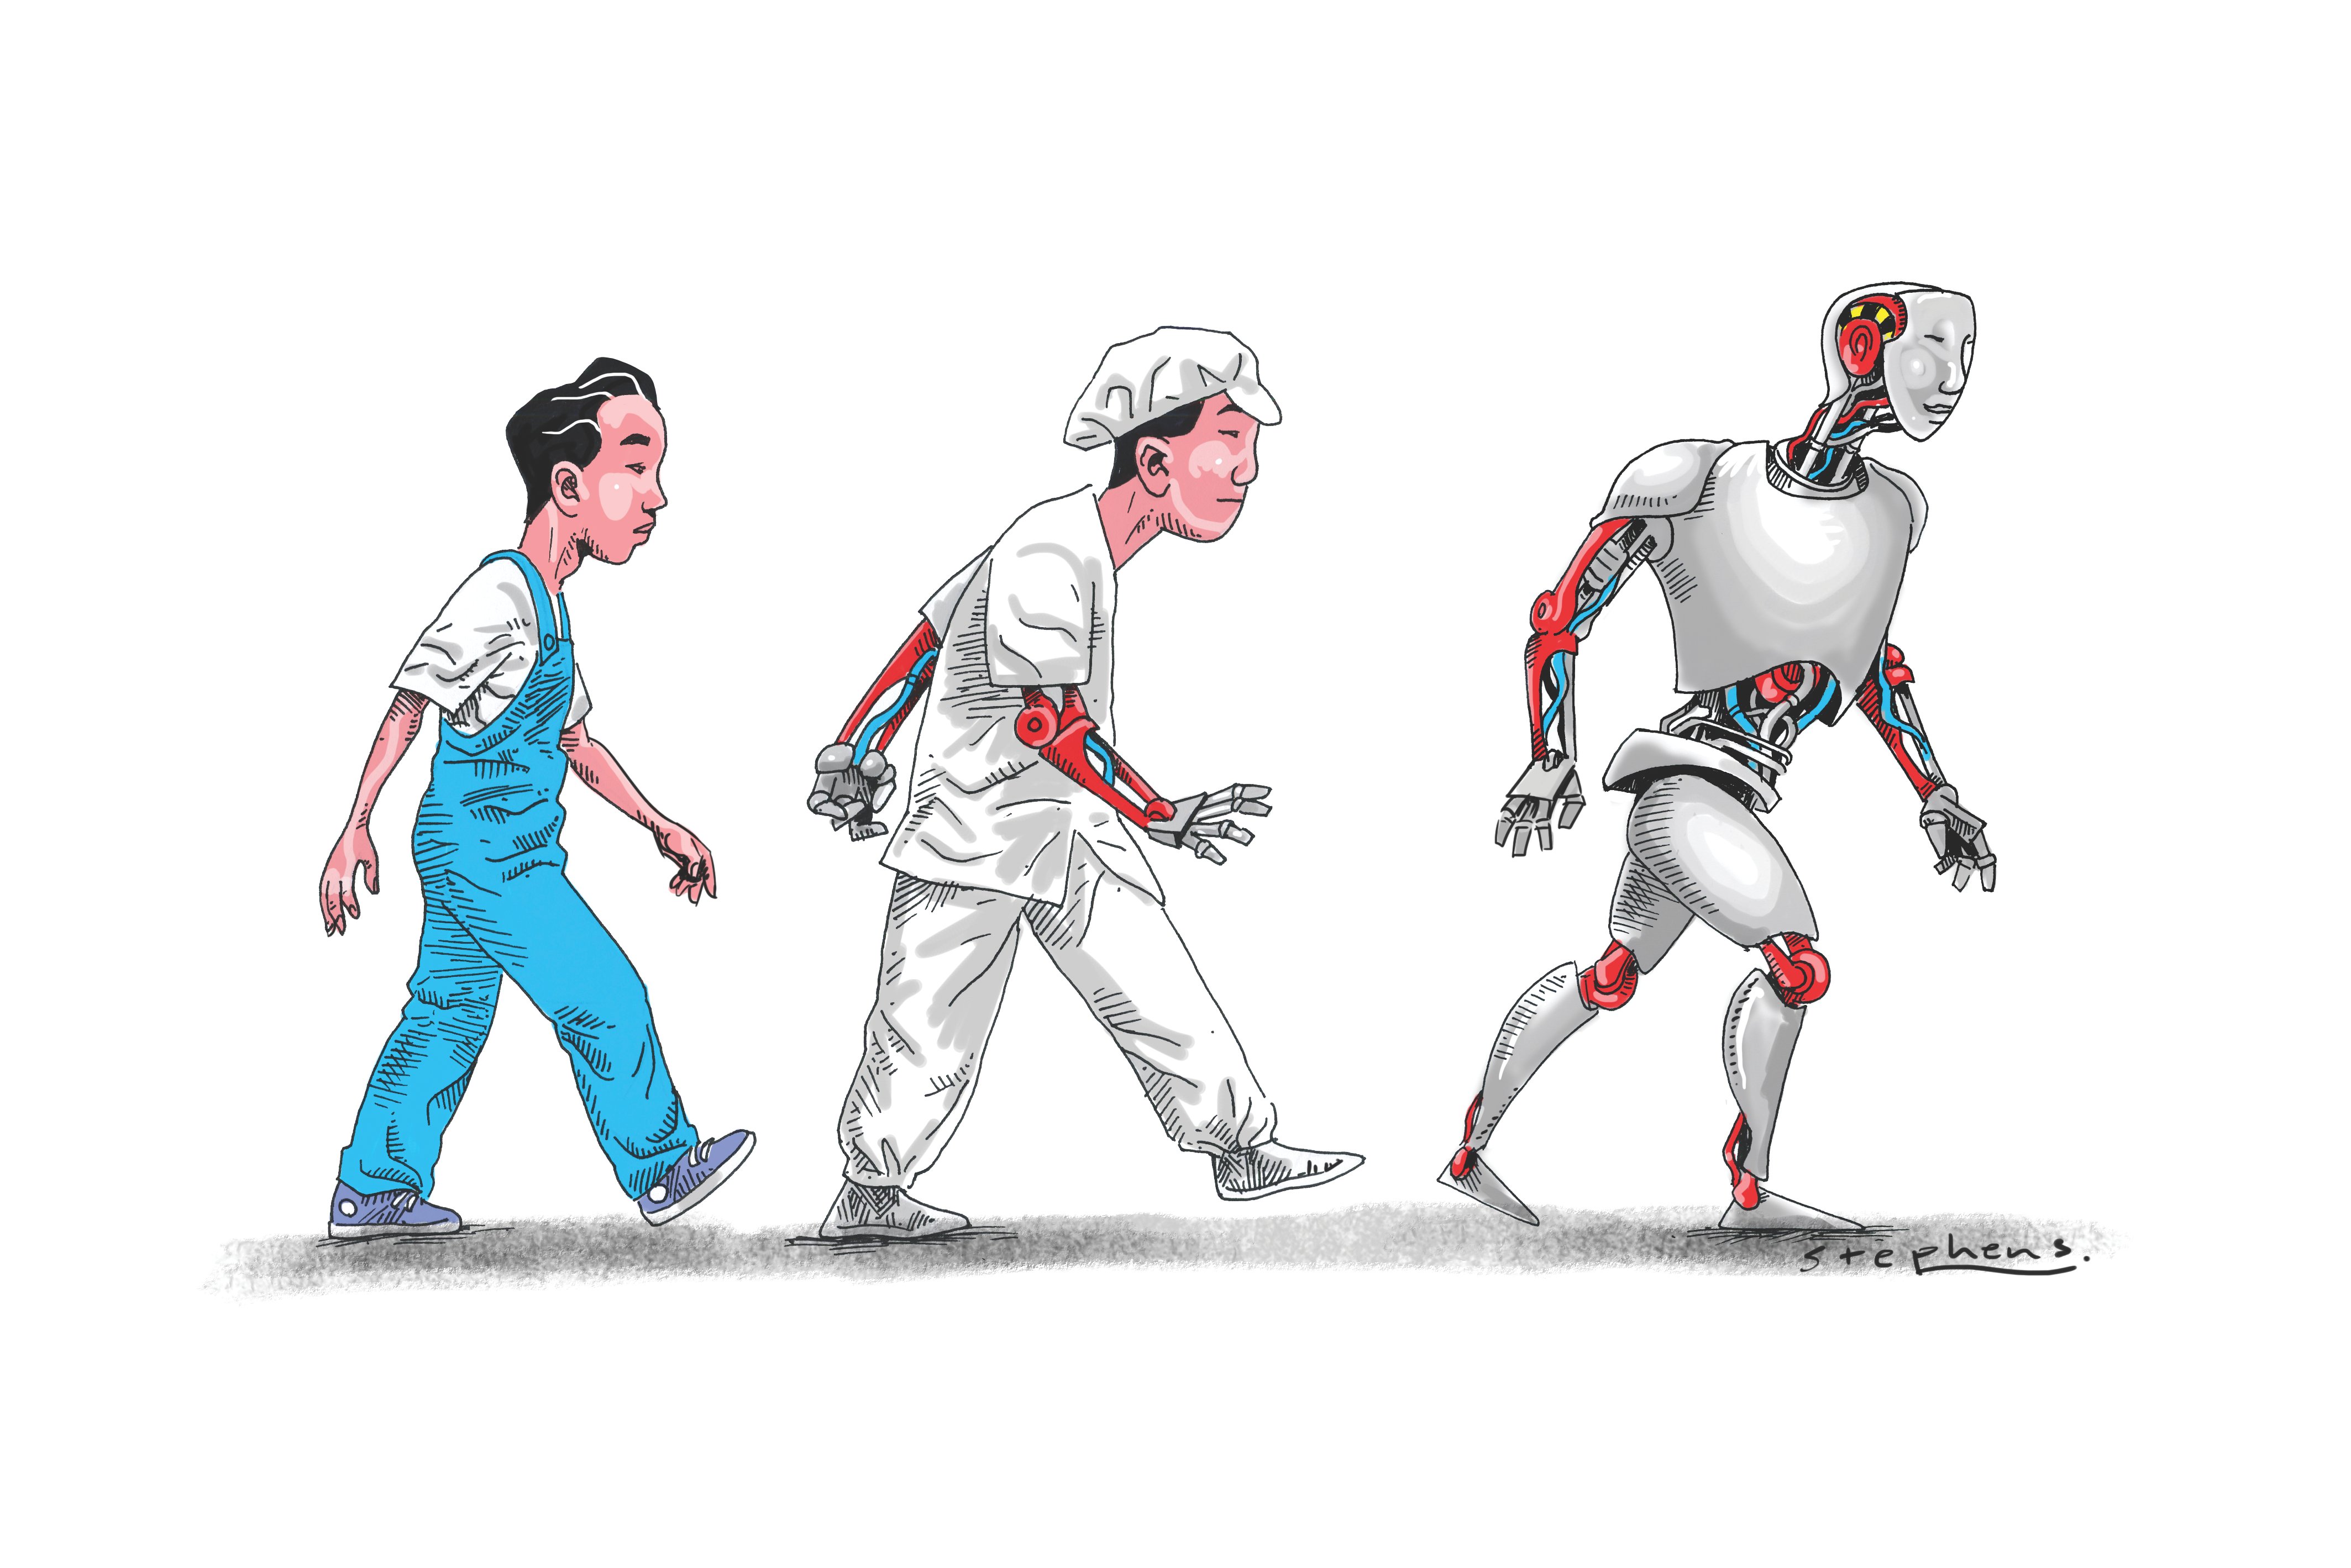 While market drivers help explain China's emphasis on robots, a more important factor may be China's vision for its future. 